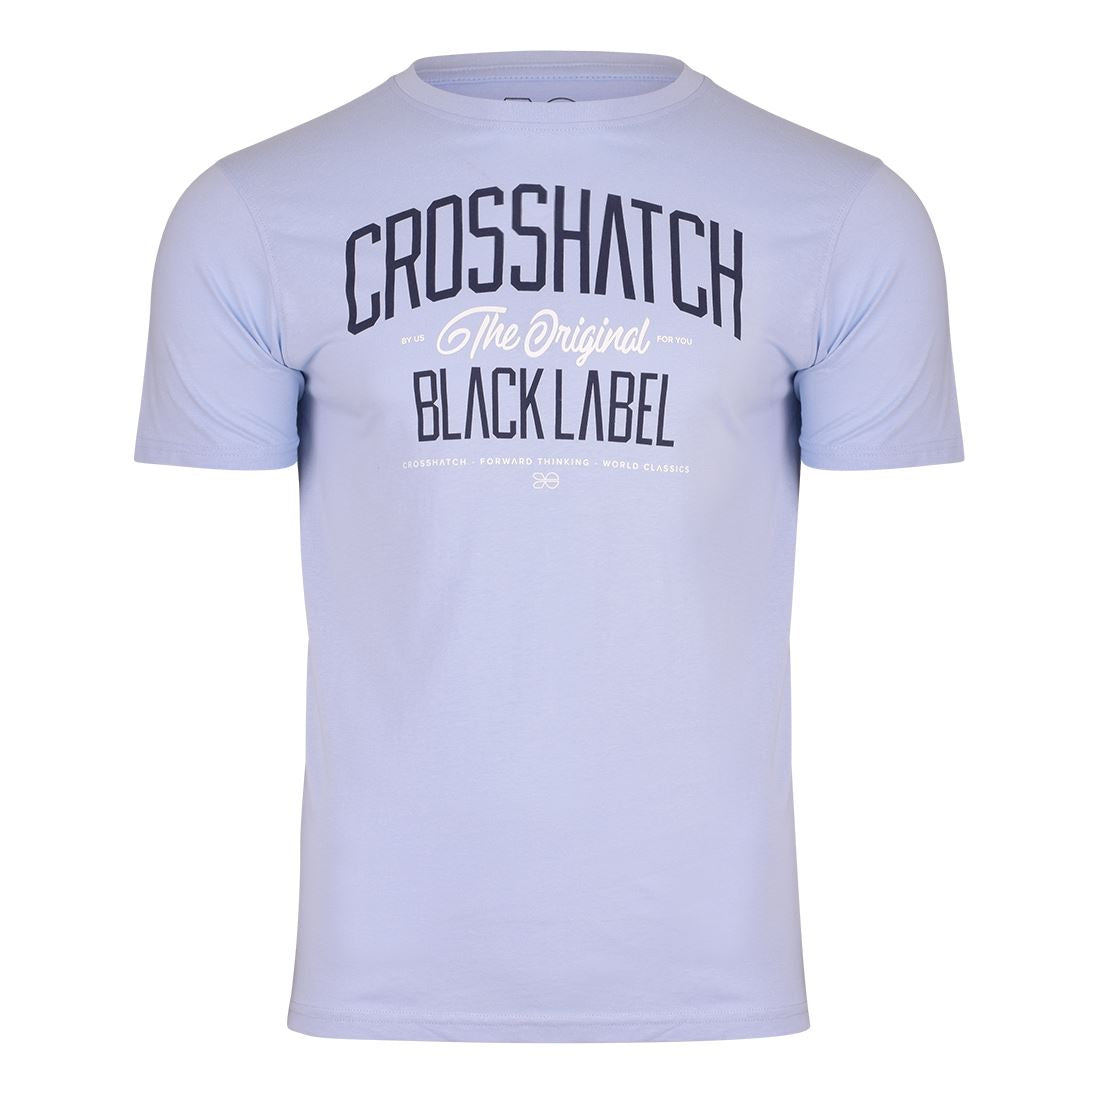 Mens Crosshatch 5 Pack T-Shirts Assorted Multipack Logo Tees Summer Cotton Tops